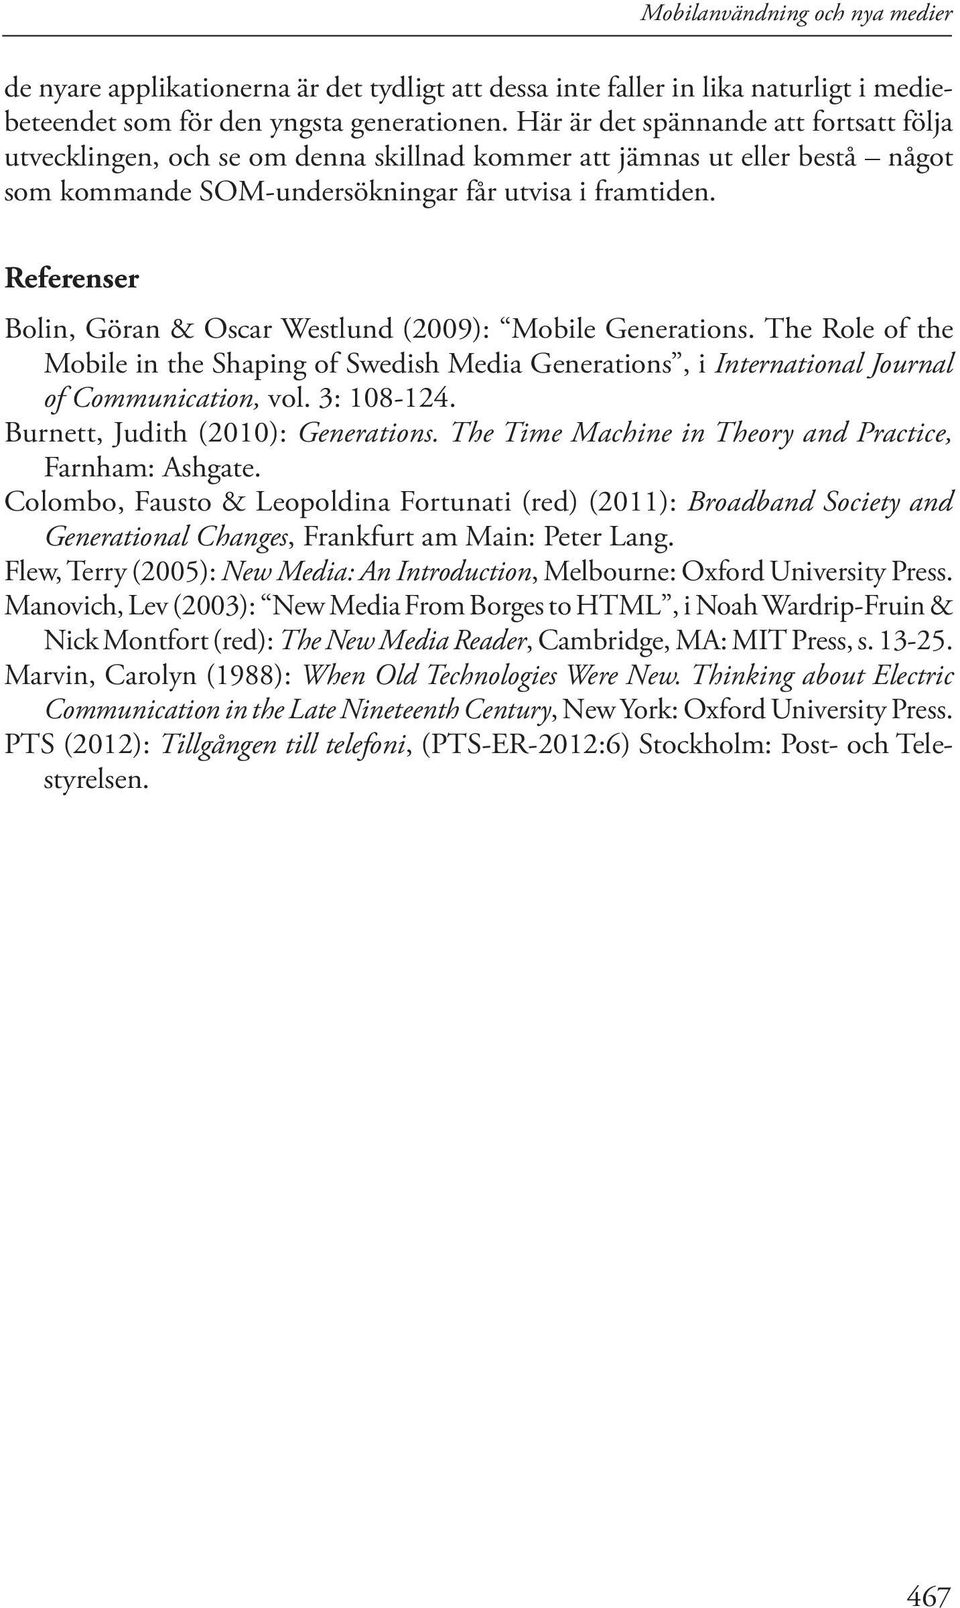 Referenser Bolin, Göran & Oscar Westlund (2009): Mobile Generations. The Role of the Mobile in the Shaping of Swedish Media Generations, i International Journal of Communication, vol. 3: 108-124.